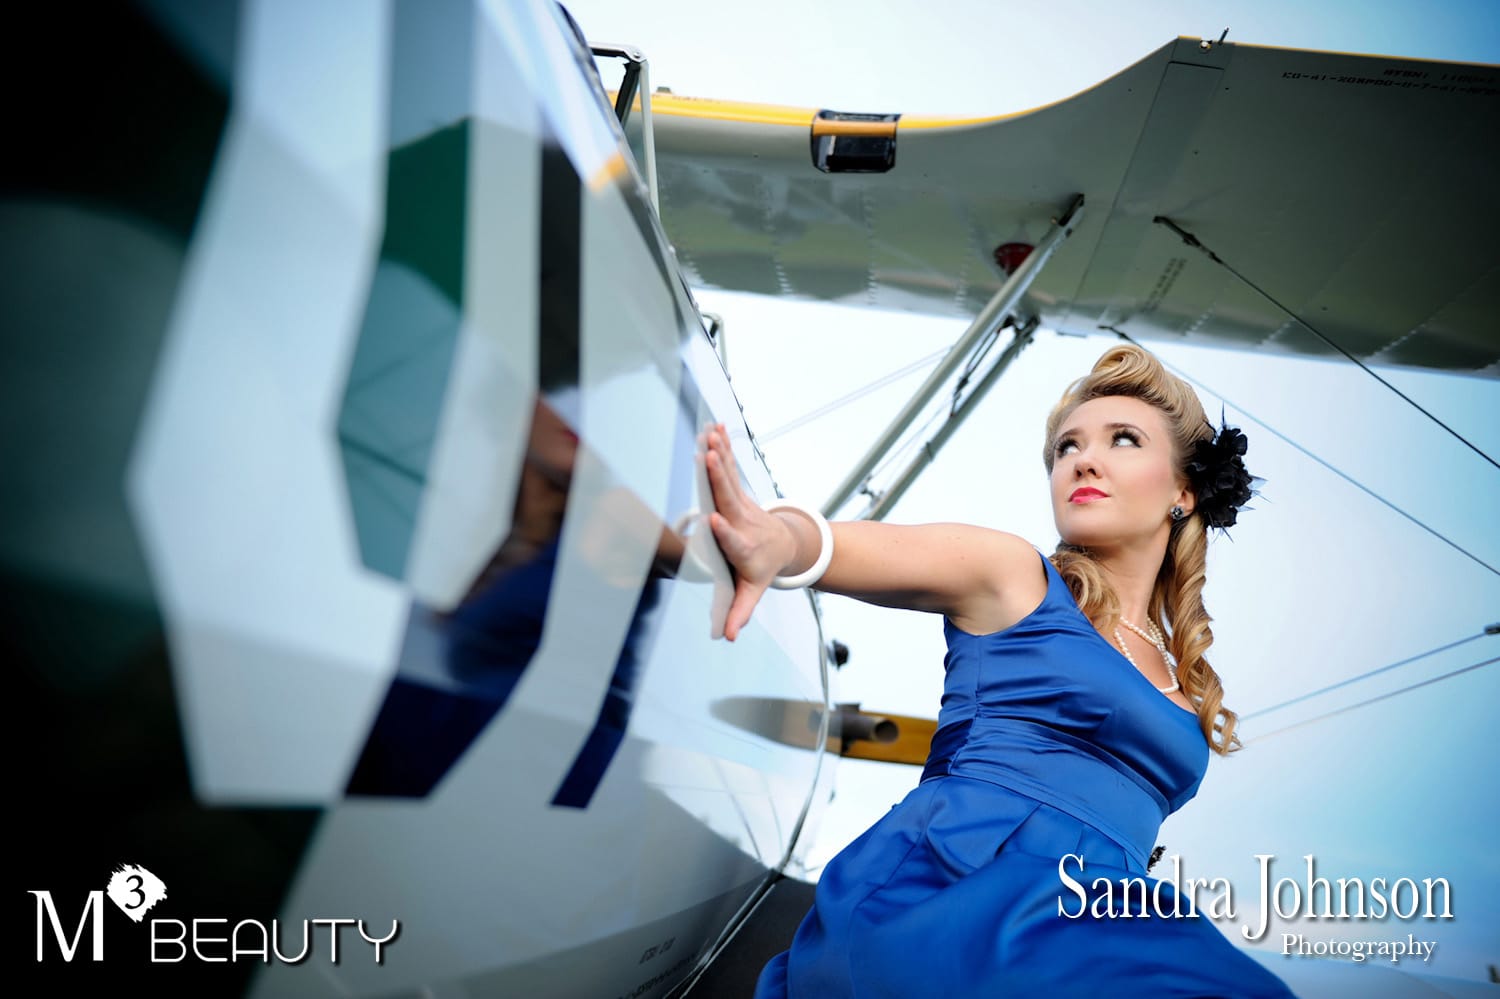 Woman leaning against an airplane. She is dressed in a vintage blue dress, has blonde hair, and a black flower in her hair